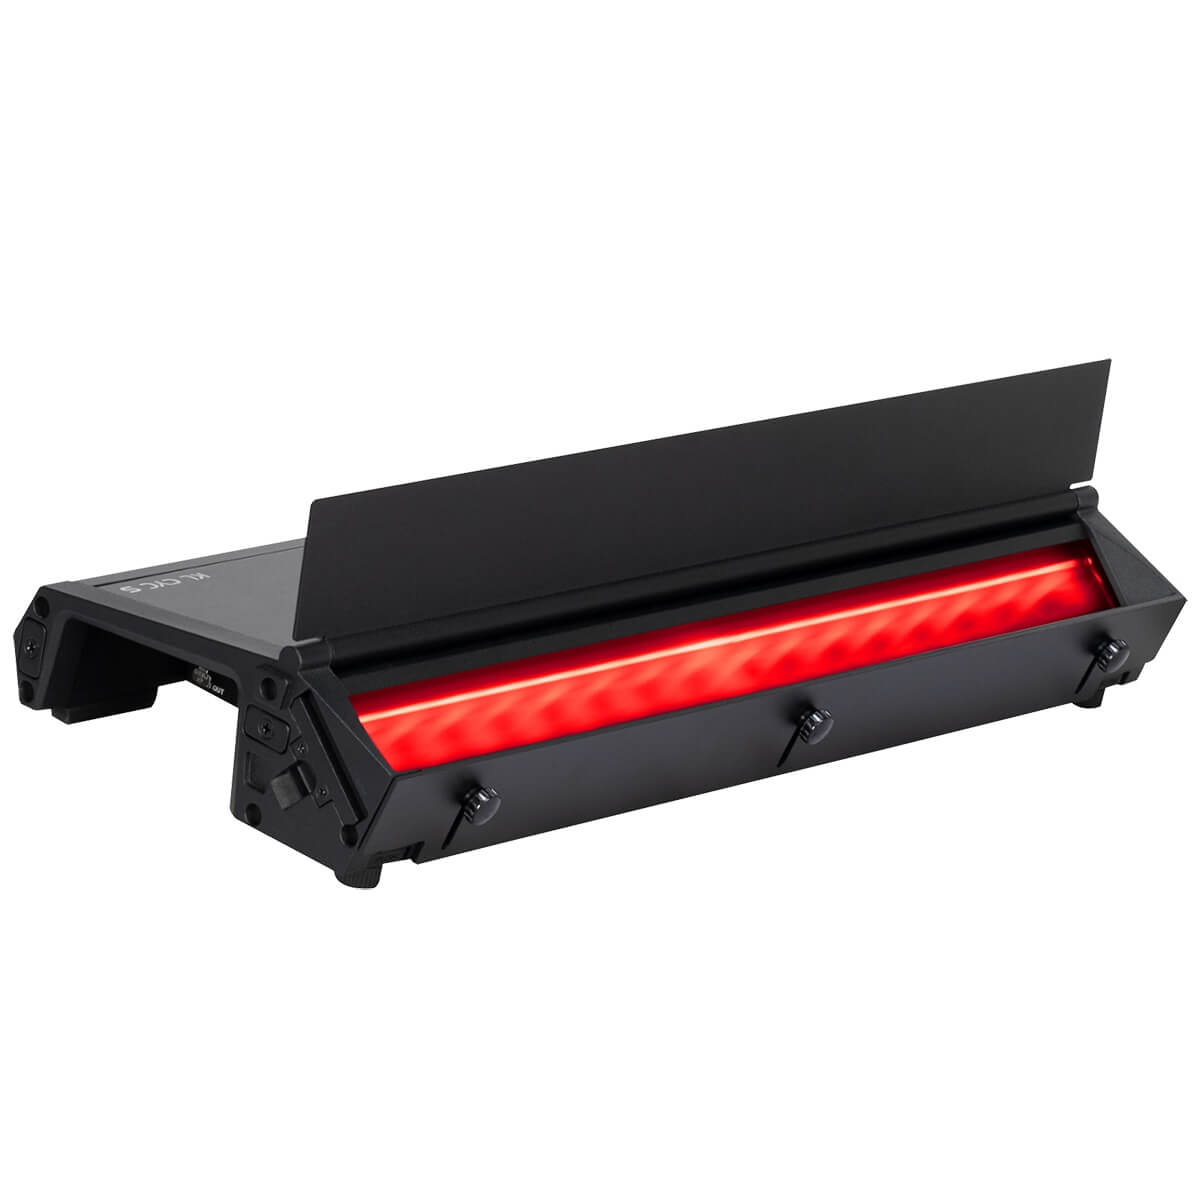 Elation KL CYC S - RGBMA LED Cyc Light and Footlight Fixture, lit red